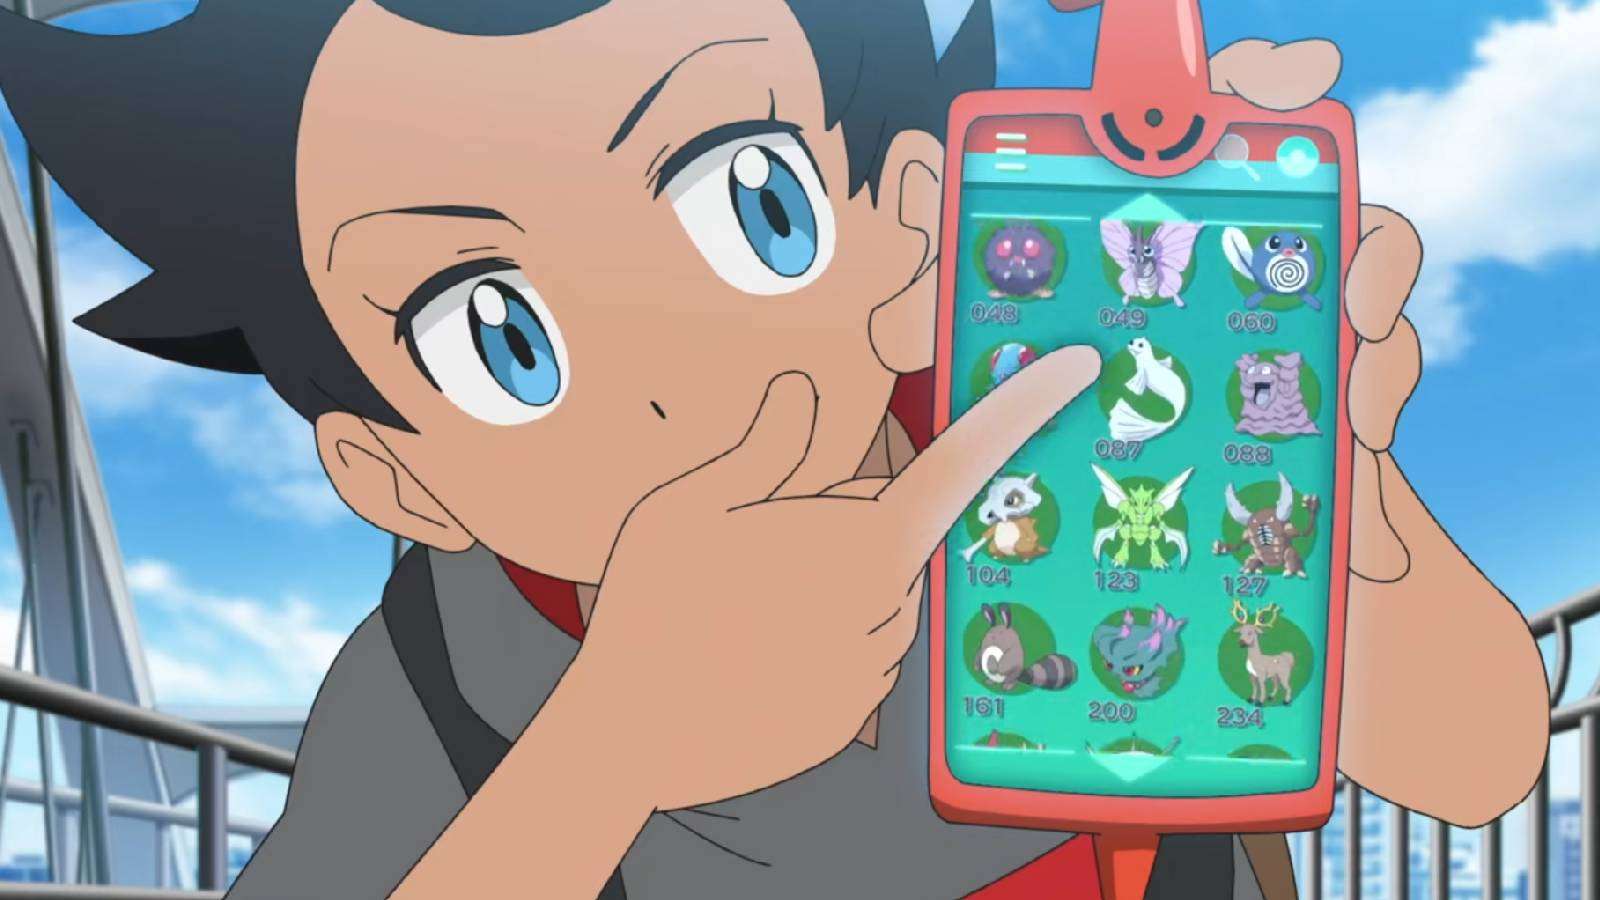 The Pokemon trainer Goh points to their Pokedex and collection of Pokemon